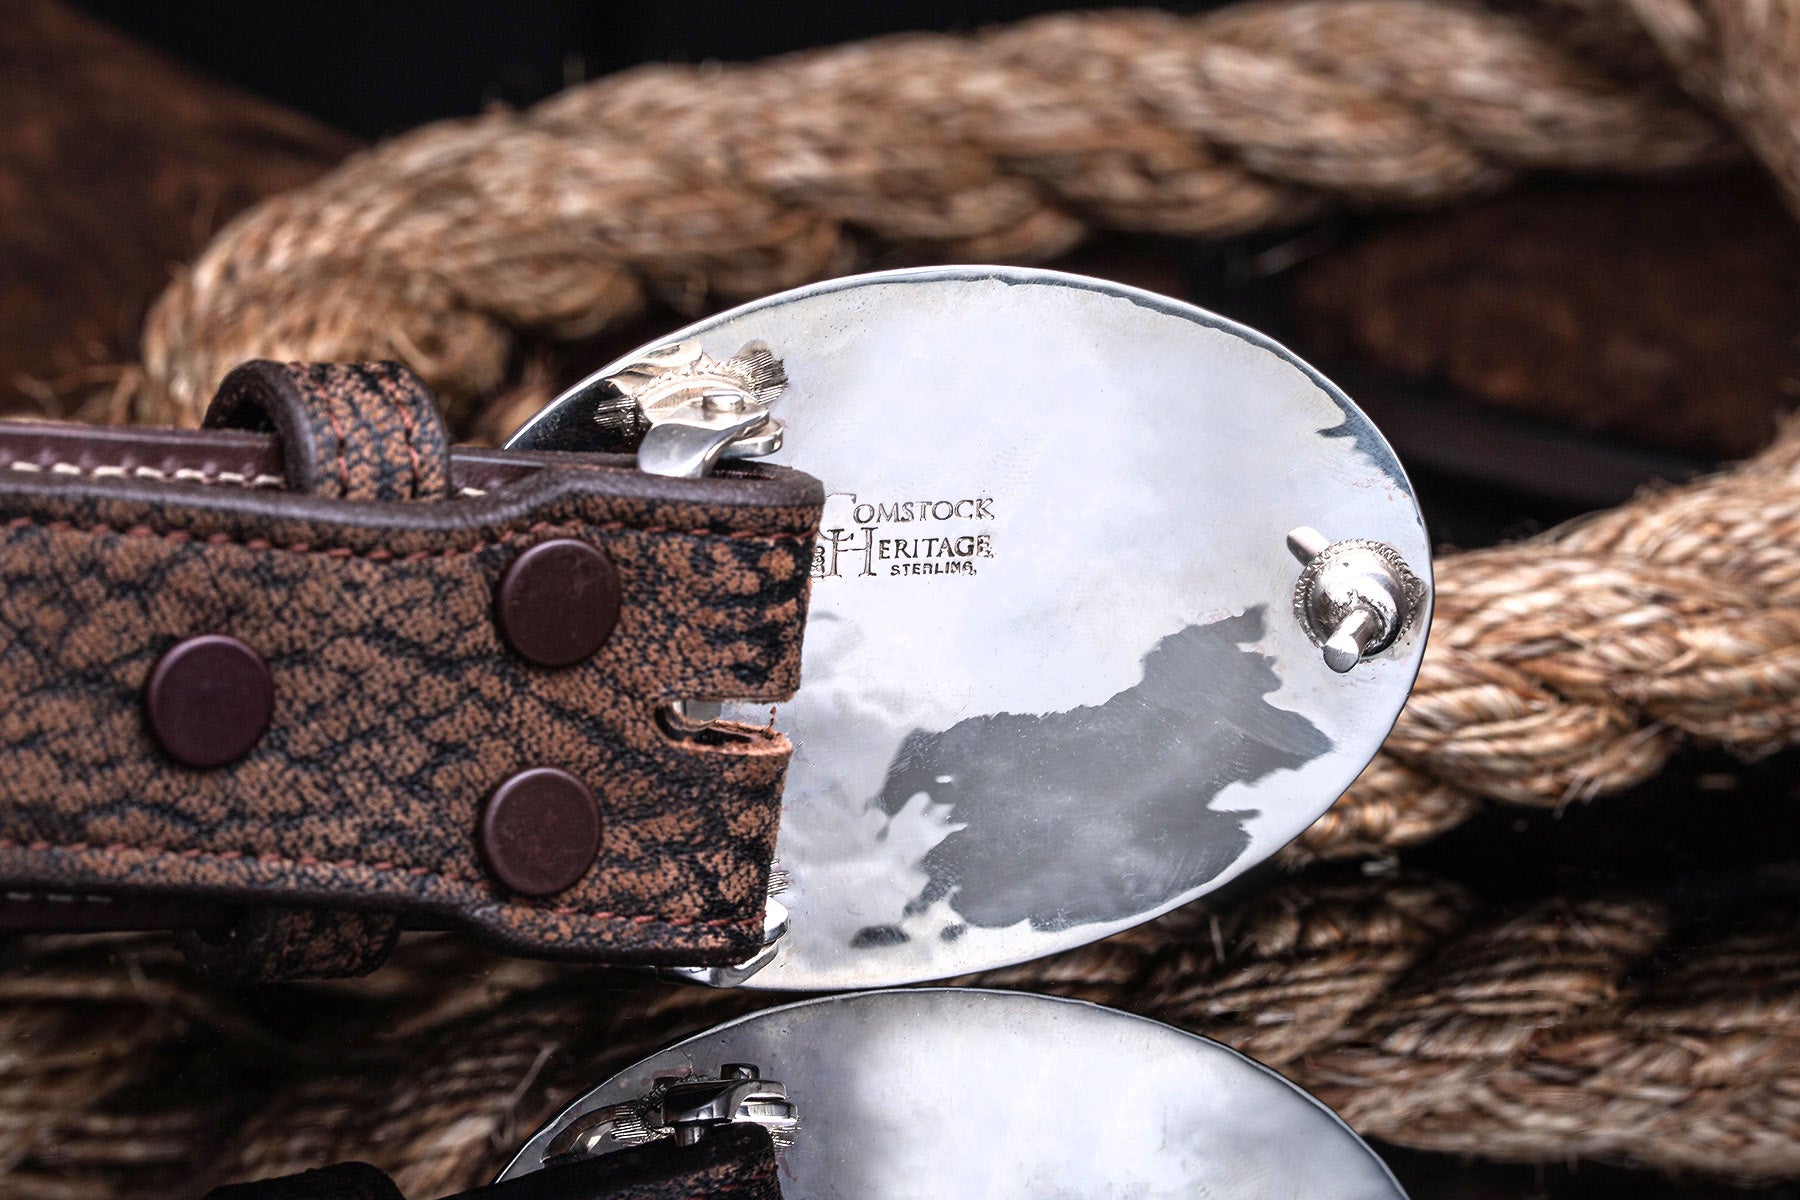 The Sutro Pontiac H Trophy Buckle | Belts And Buckles - Trophy | Comstock Heritage